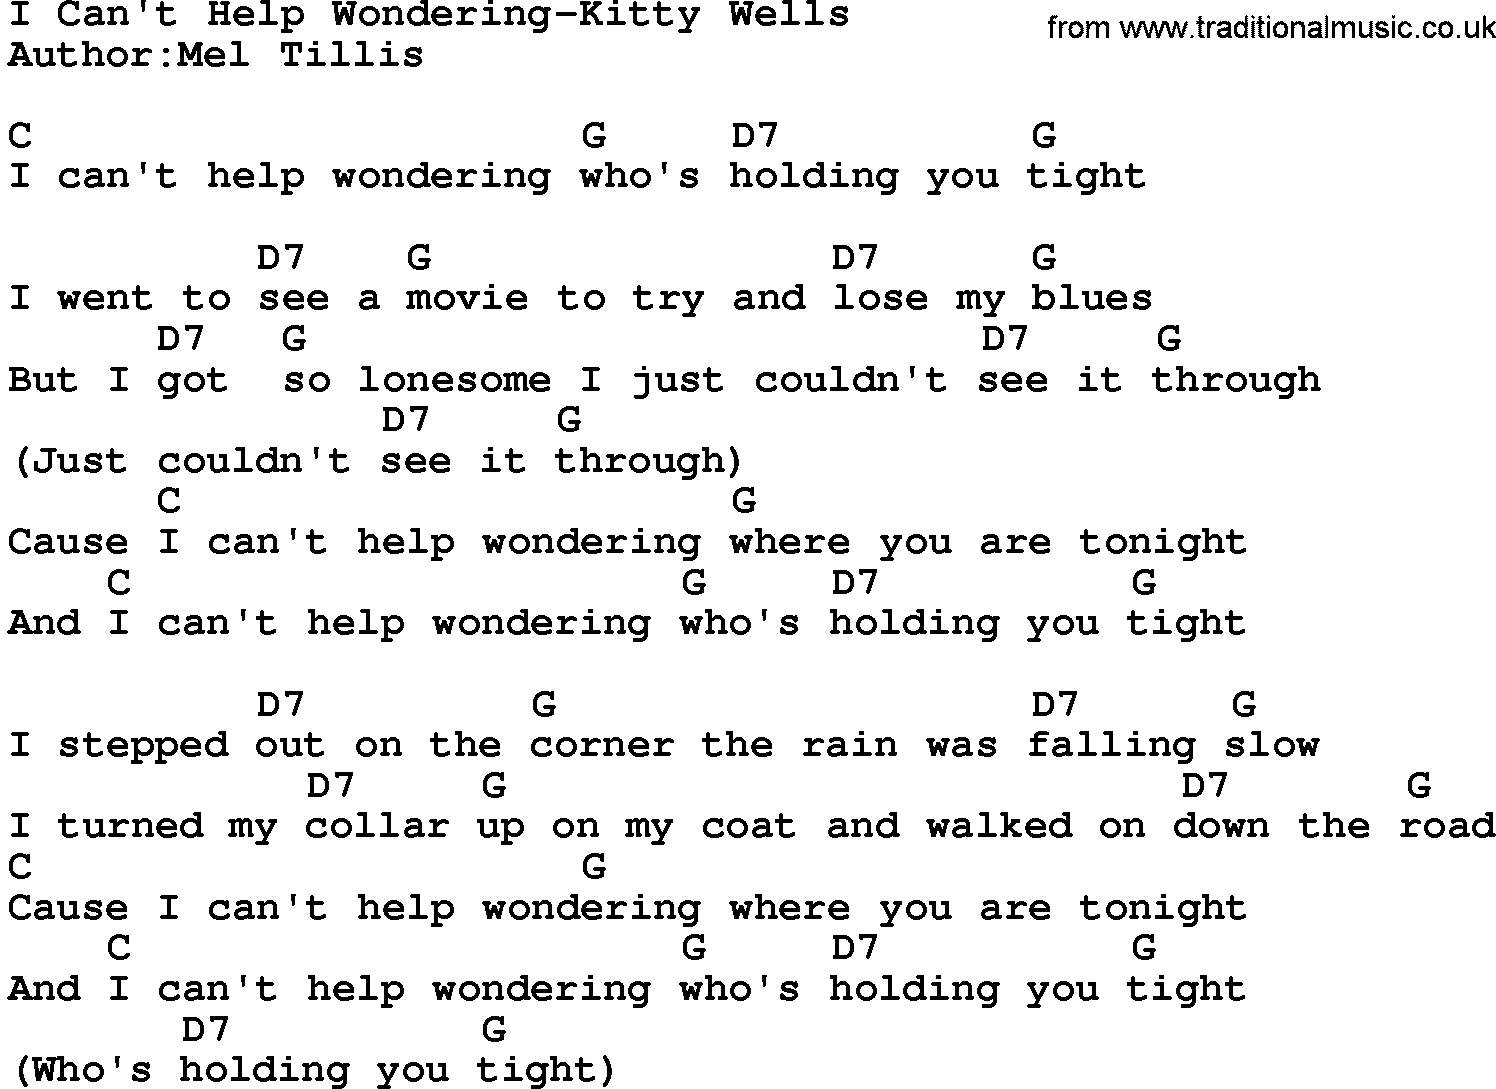 Country music song: I Can't Help Wondering-Kitty Wells lyrics and chords